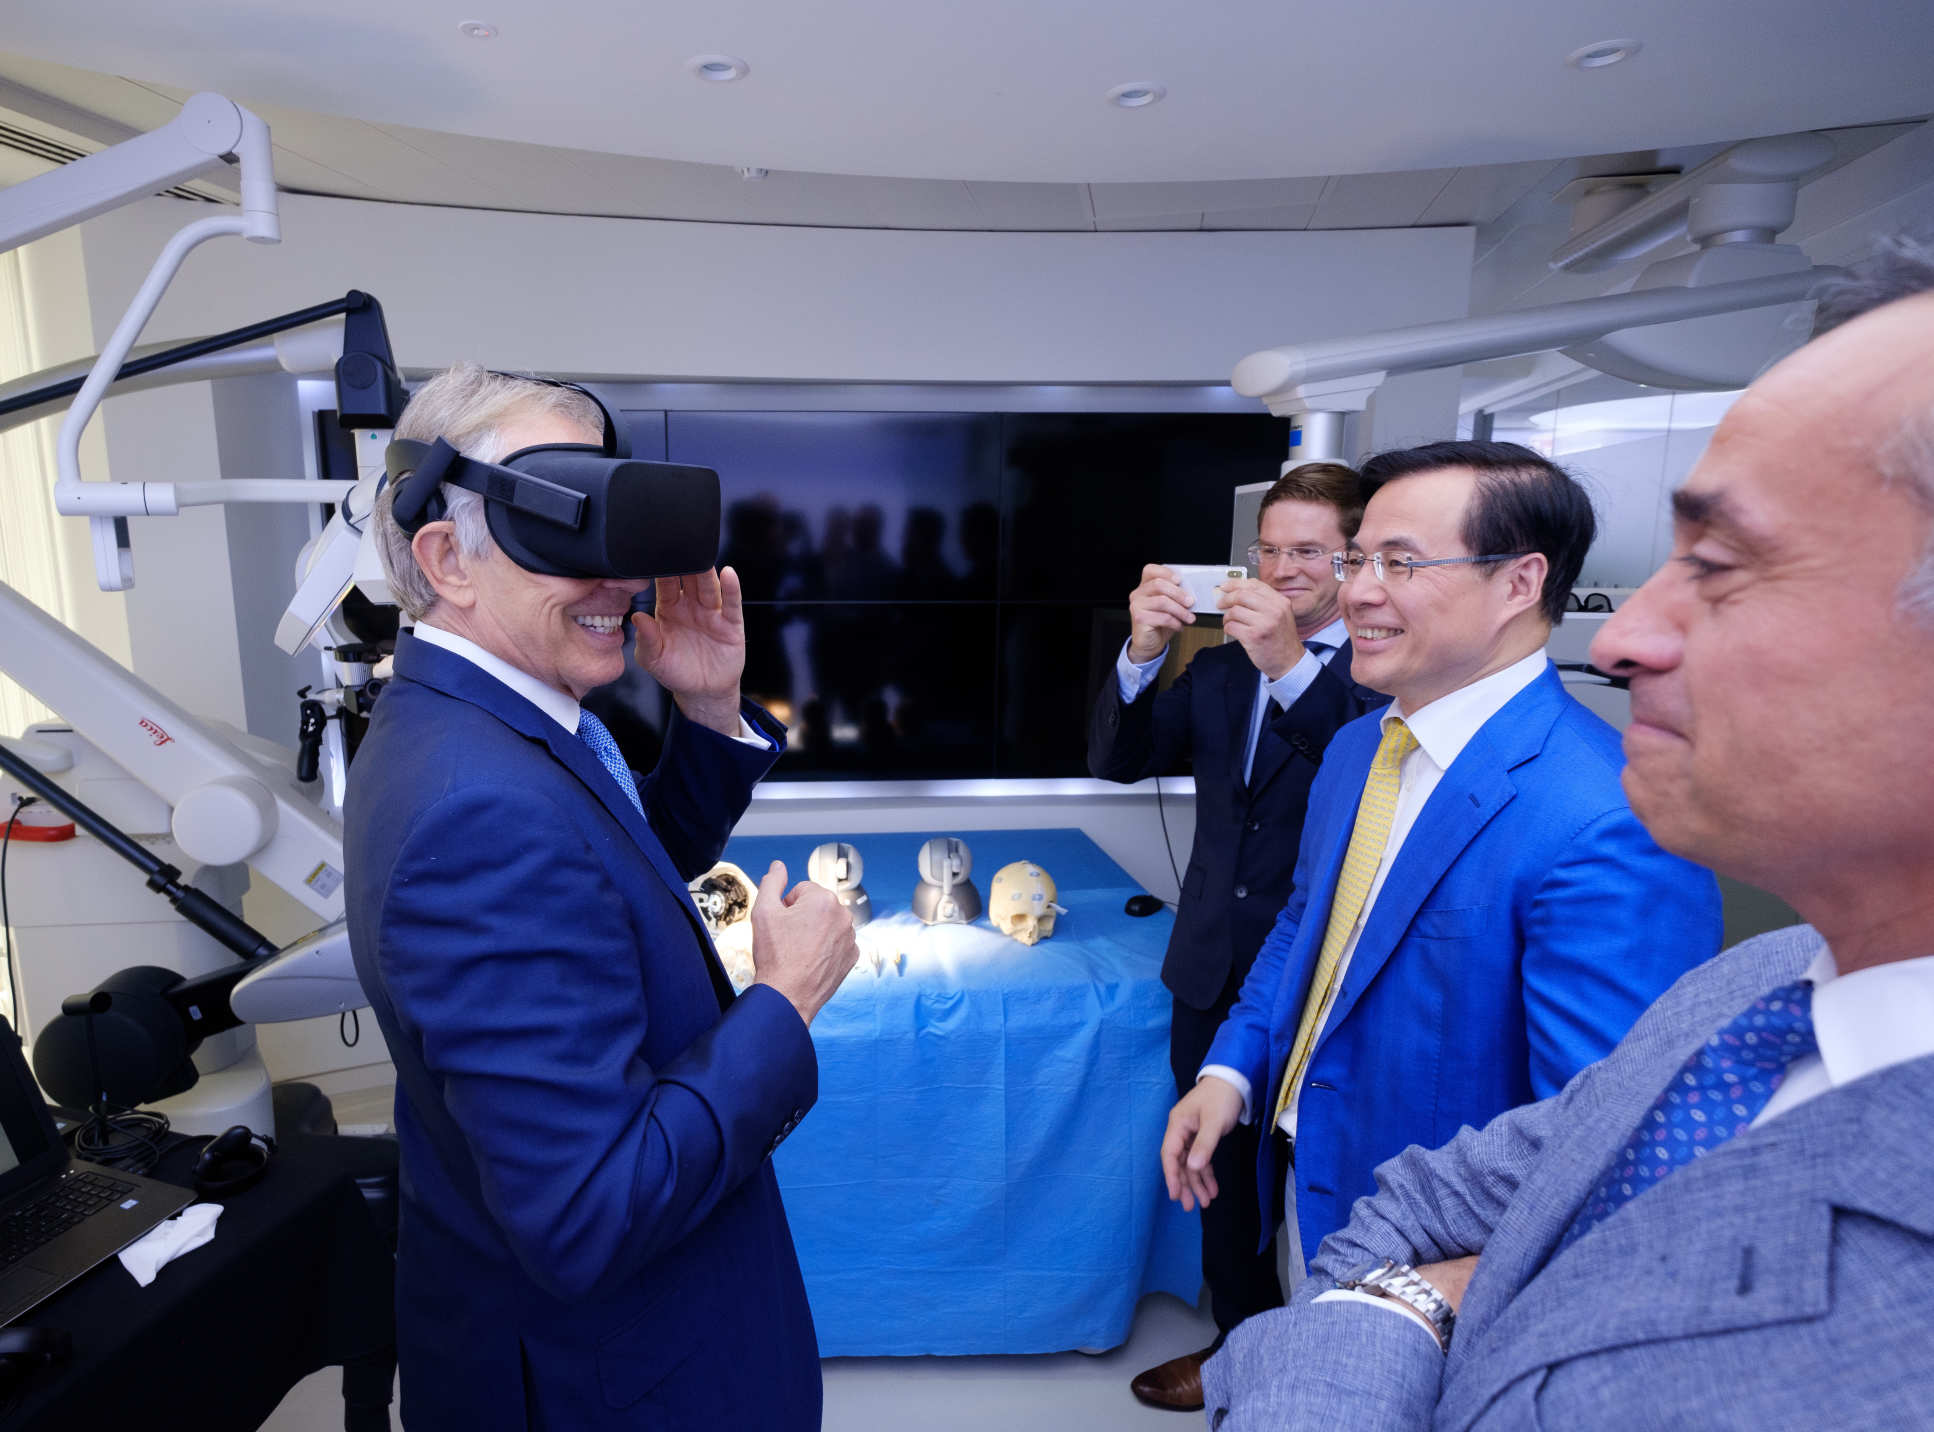 During his visit to Imperial Mr Blair toured the Hamlyn Centre for Robotics, viewing demonstrations of surgical robots, 3D printed microrobotic tools and augmented reality technology for medical imaging